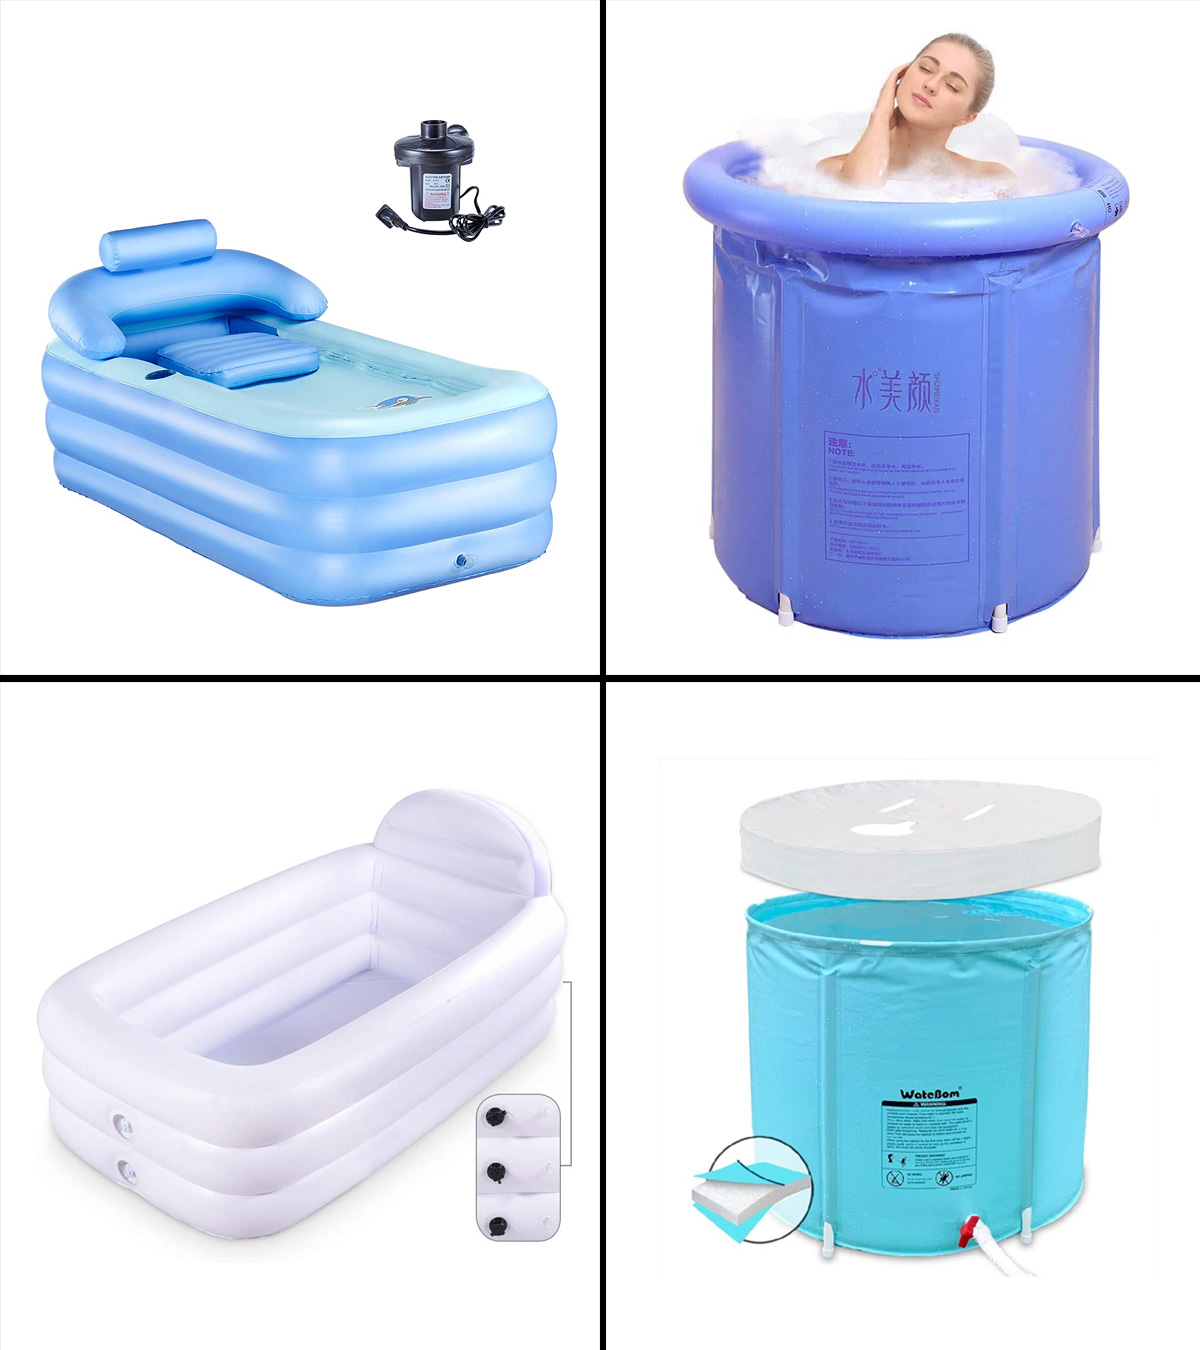 11 Best Portable Bathtubs For Adults And Kids To Relax In 2023